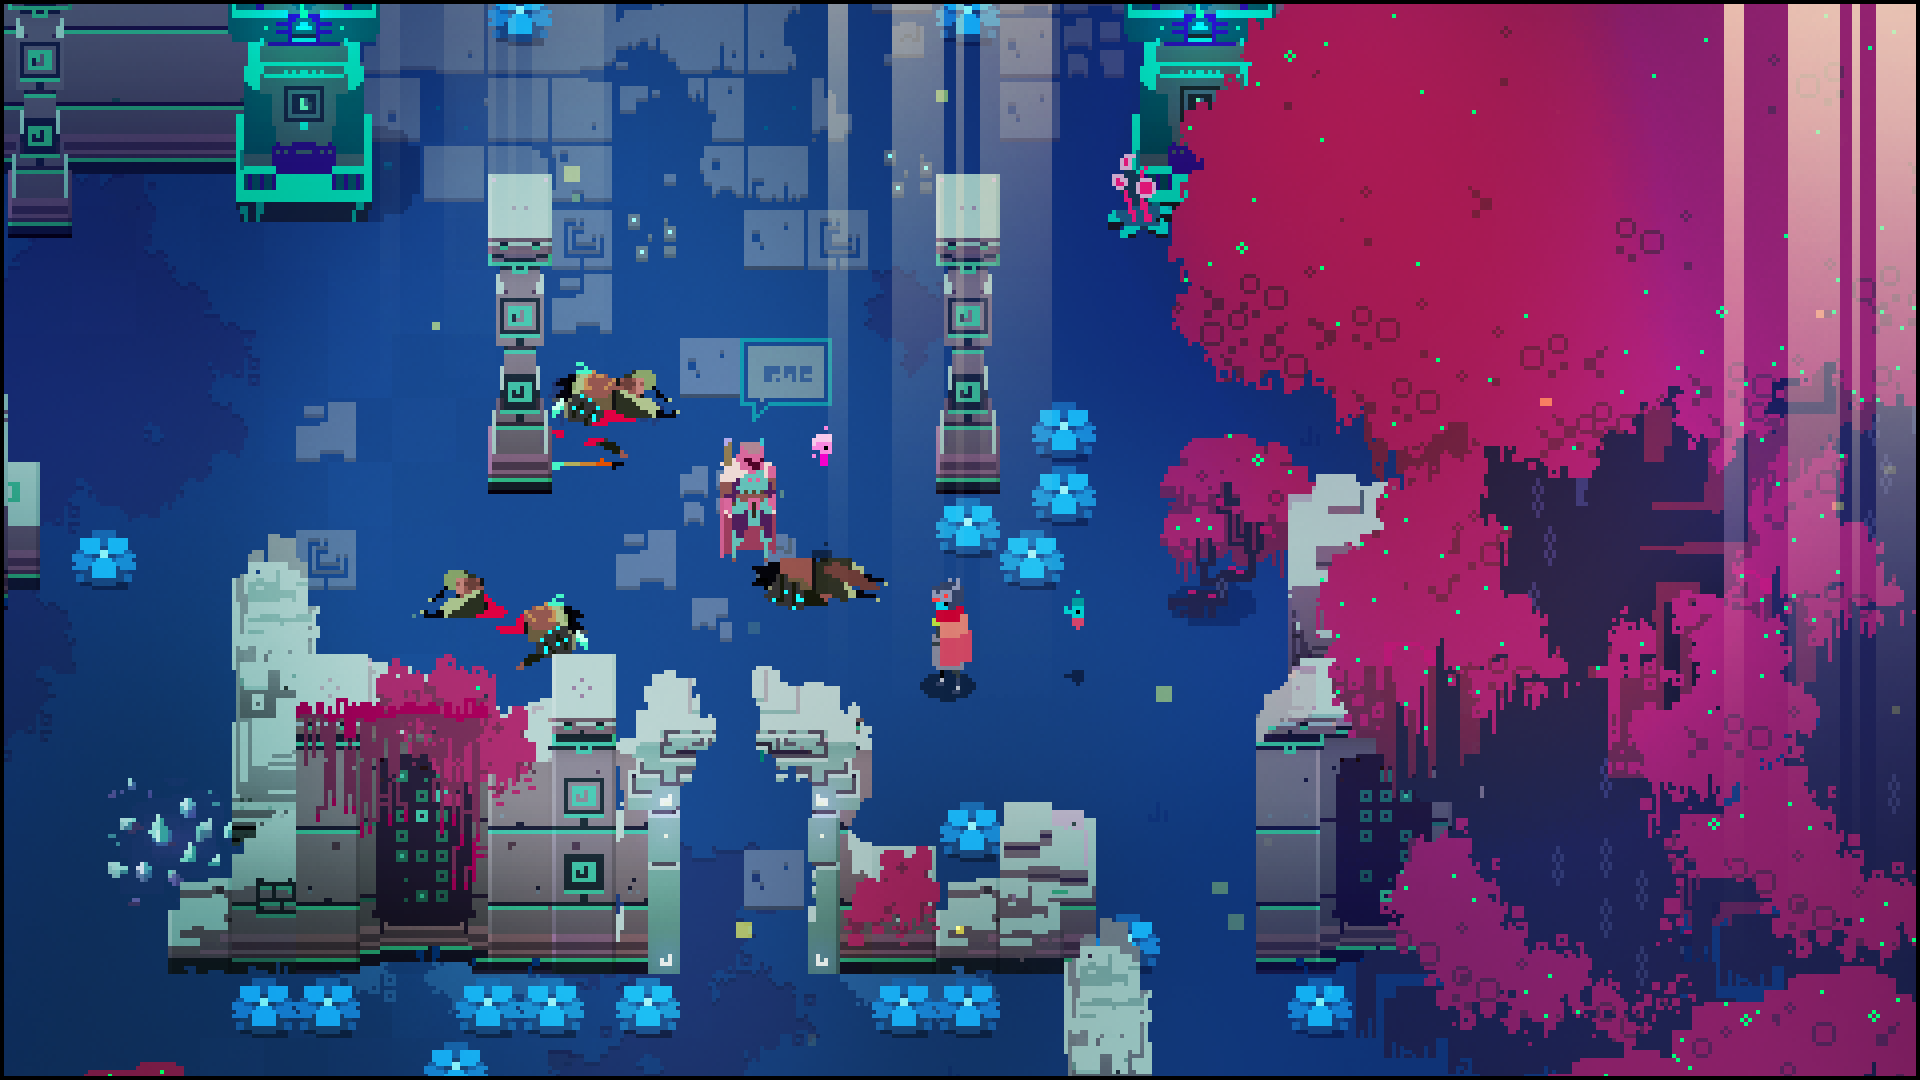 Amazing Hyper Light Drifter Pictures & Backgrounds